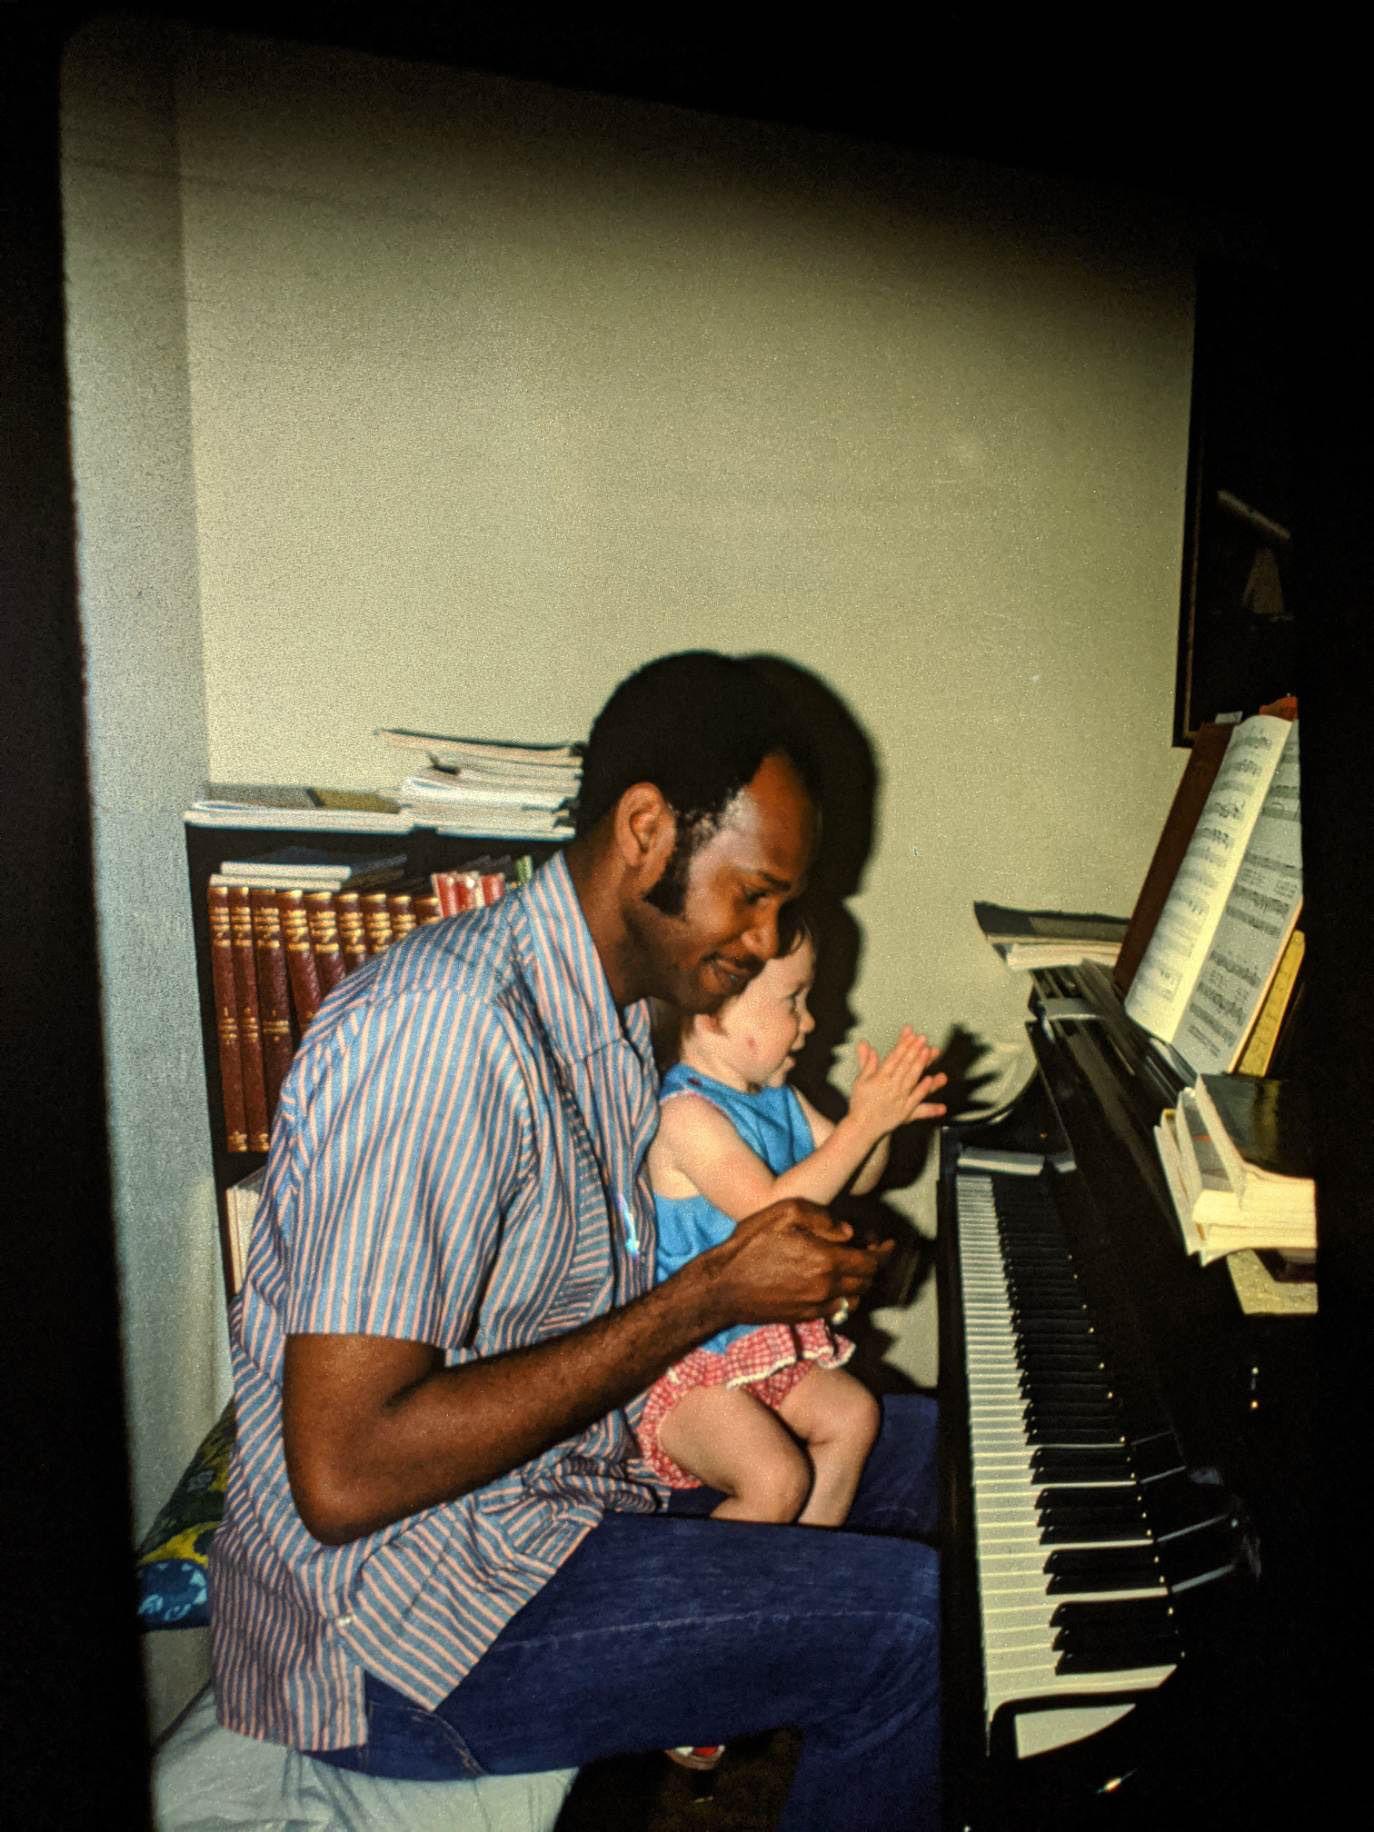 Shara Nova in the lap of her uncle, Donald Ryan, in the mid-1970s (photograph courtesy of Shara Nova)